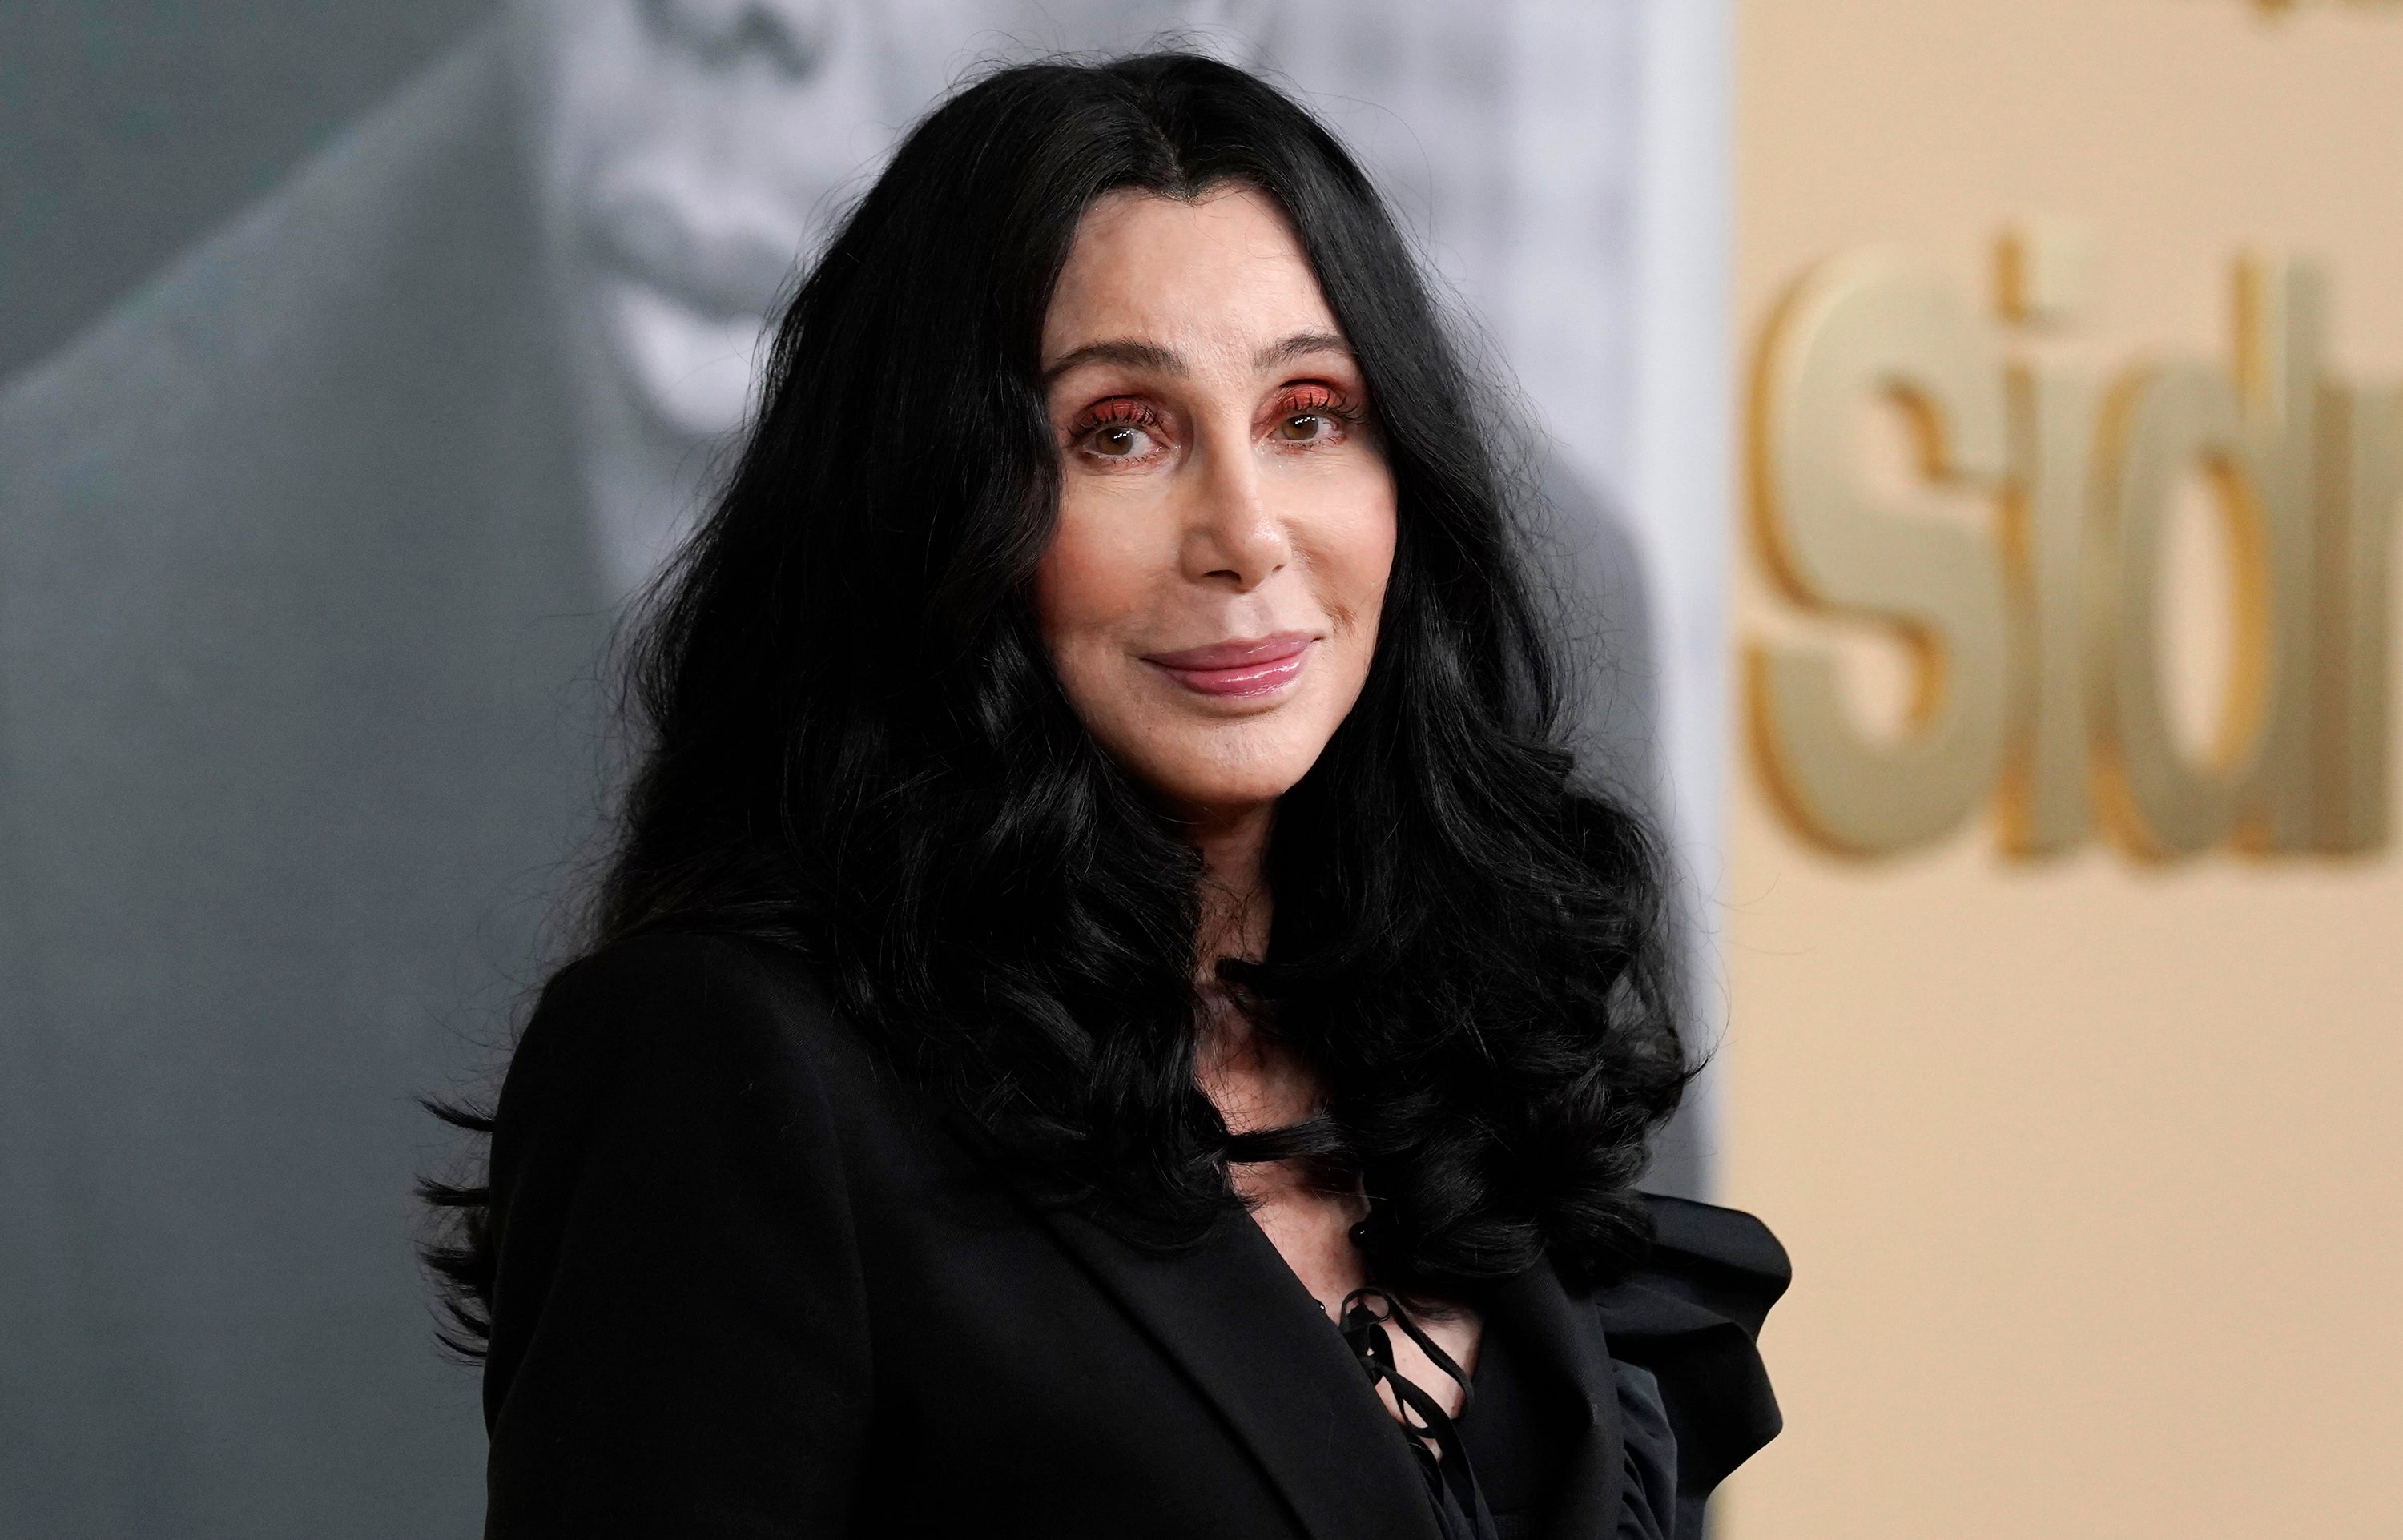 Cher’s application for a conservatorship over her son was rejected